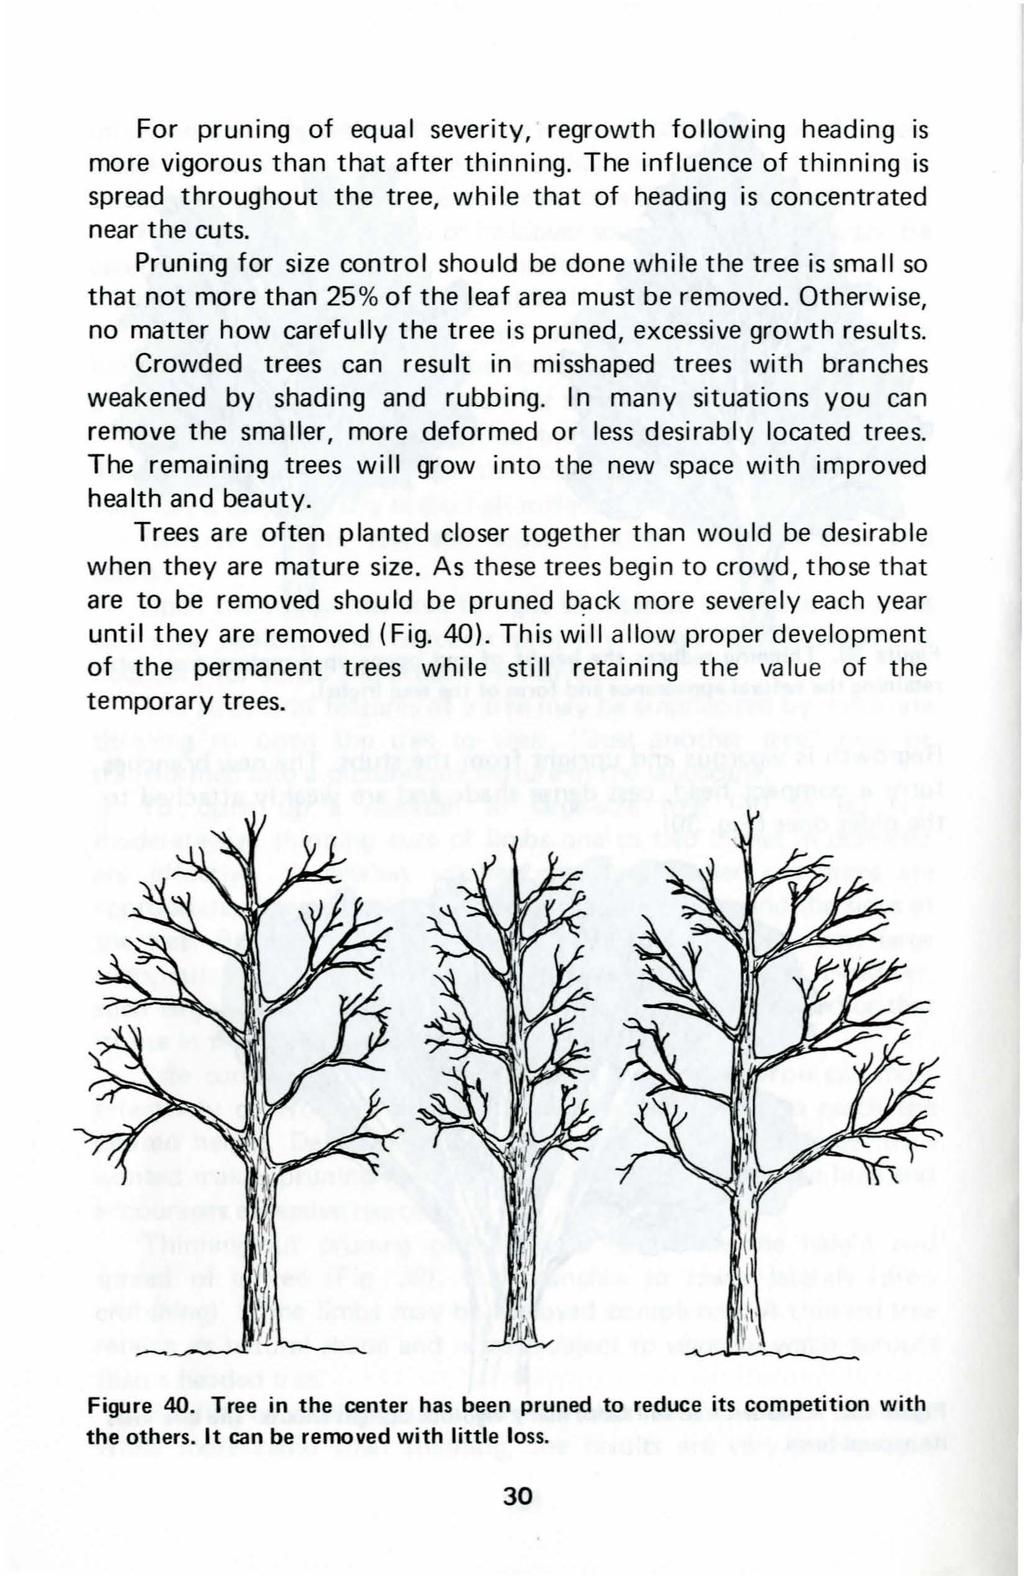 For pruning of equal severity, regrowth following heading is more vigorous than that after thinning.